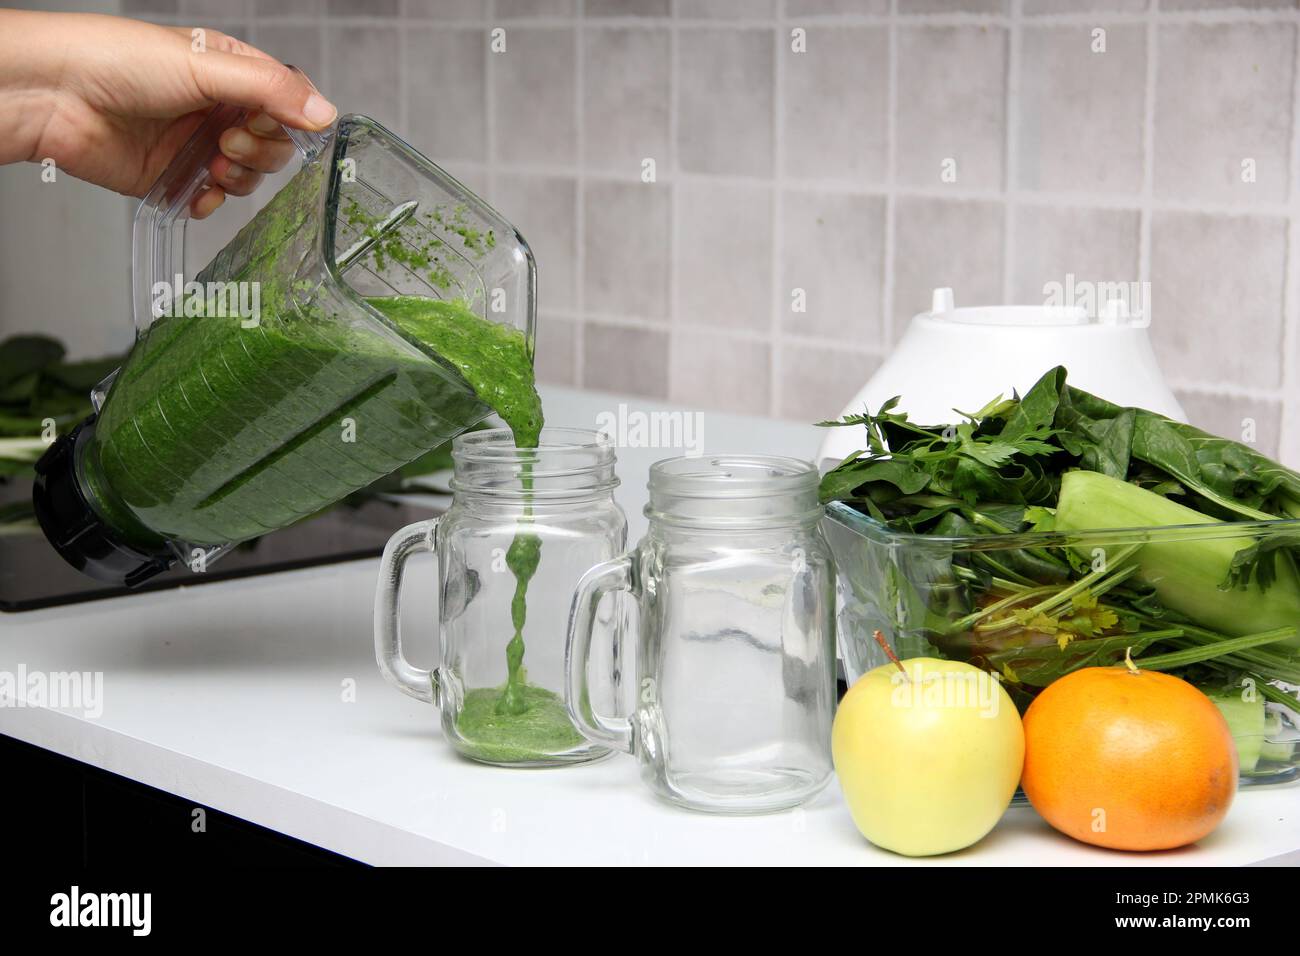 https://c8.alamy.com/comp/2PMK6G3/serve-green-juice-in-mason-jar-just-made-in-kitchen-blender-with-ingredients-like-cucumber-chard-spinach-celery-for-a-nutritious-breakfast-2PMK6G3.jpg